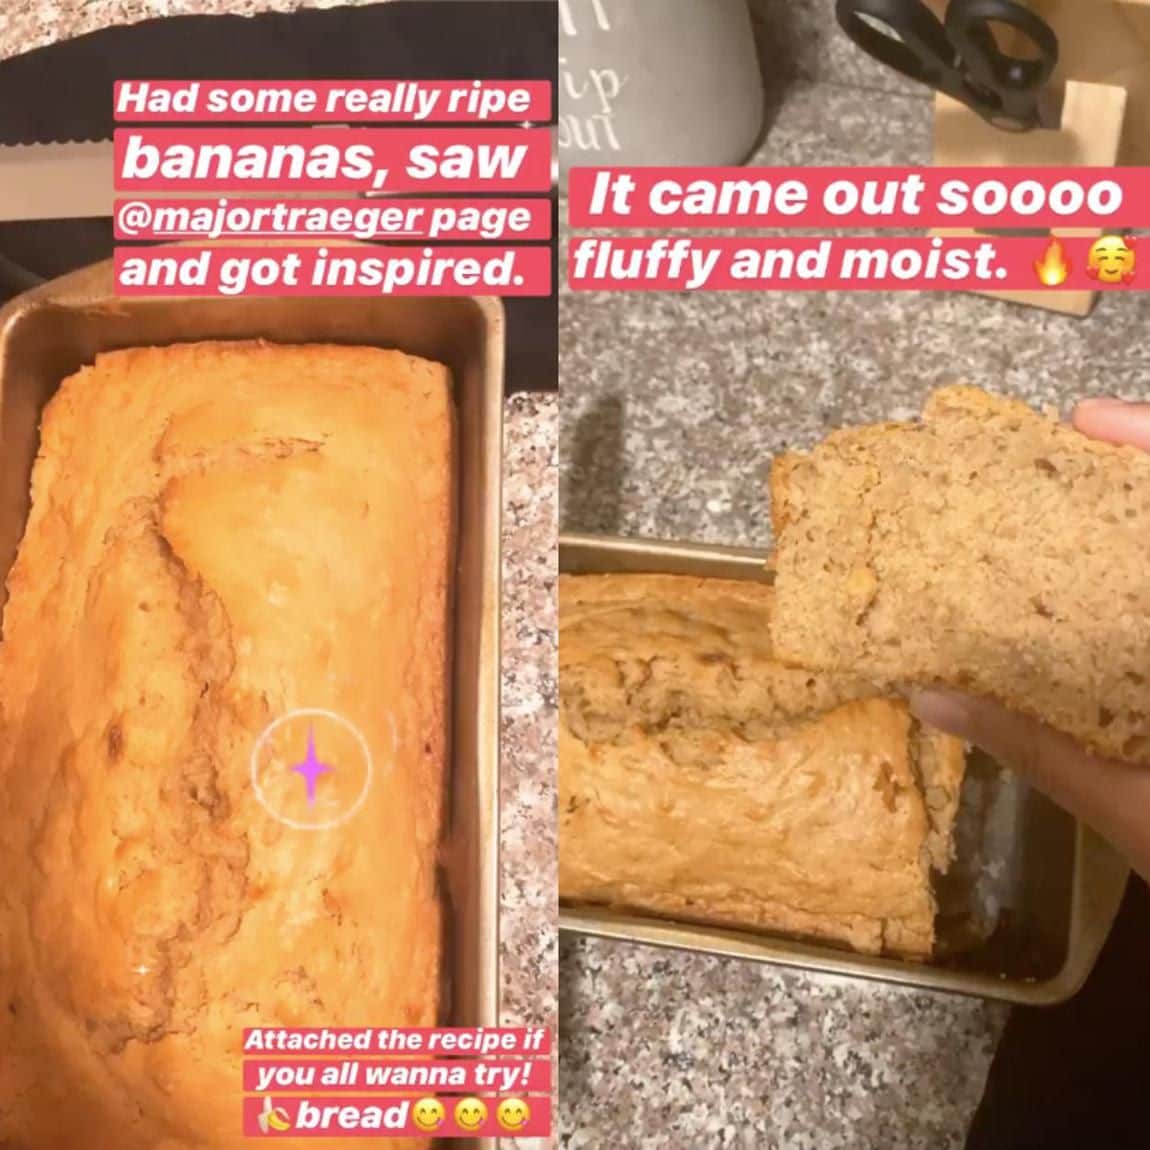 Julissa Calderon shares a picture of banana bread that she made